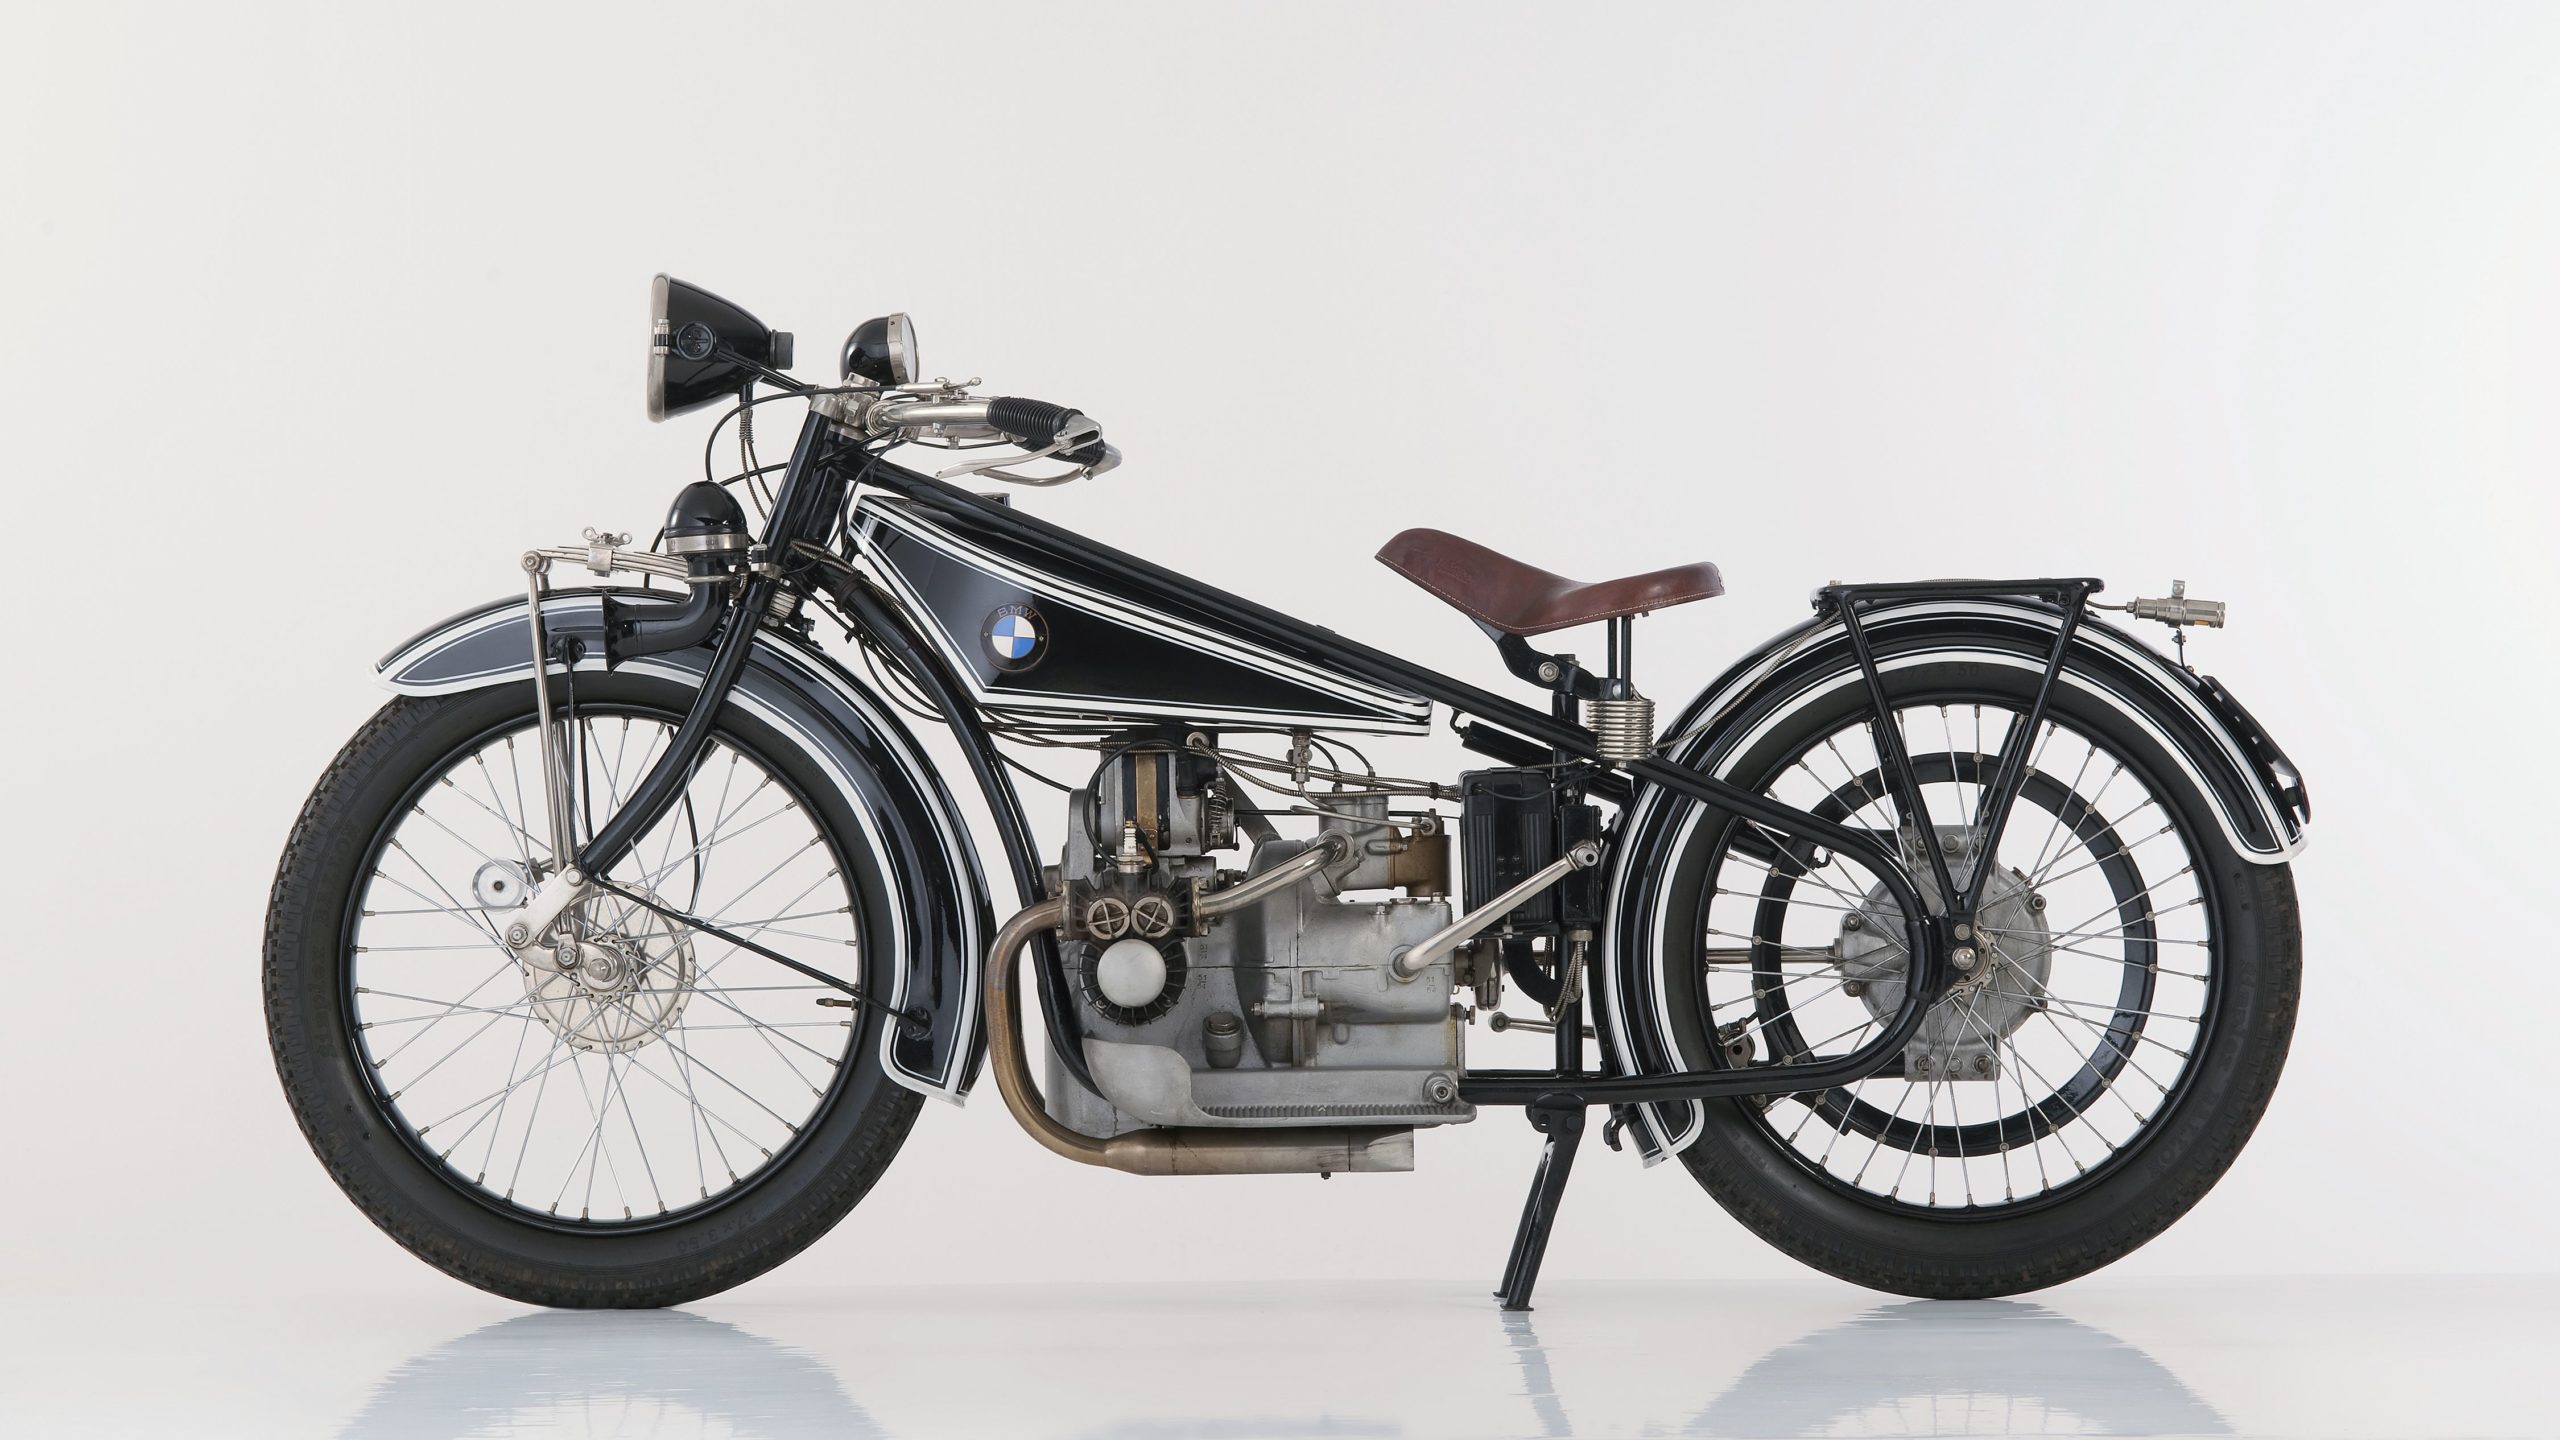 A BMW R32 Motorcycle from 1932 in a studio